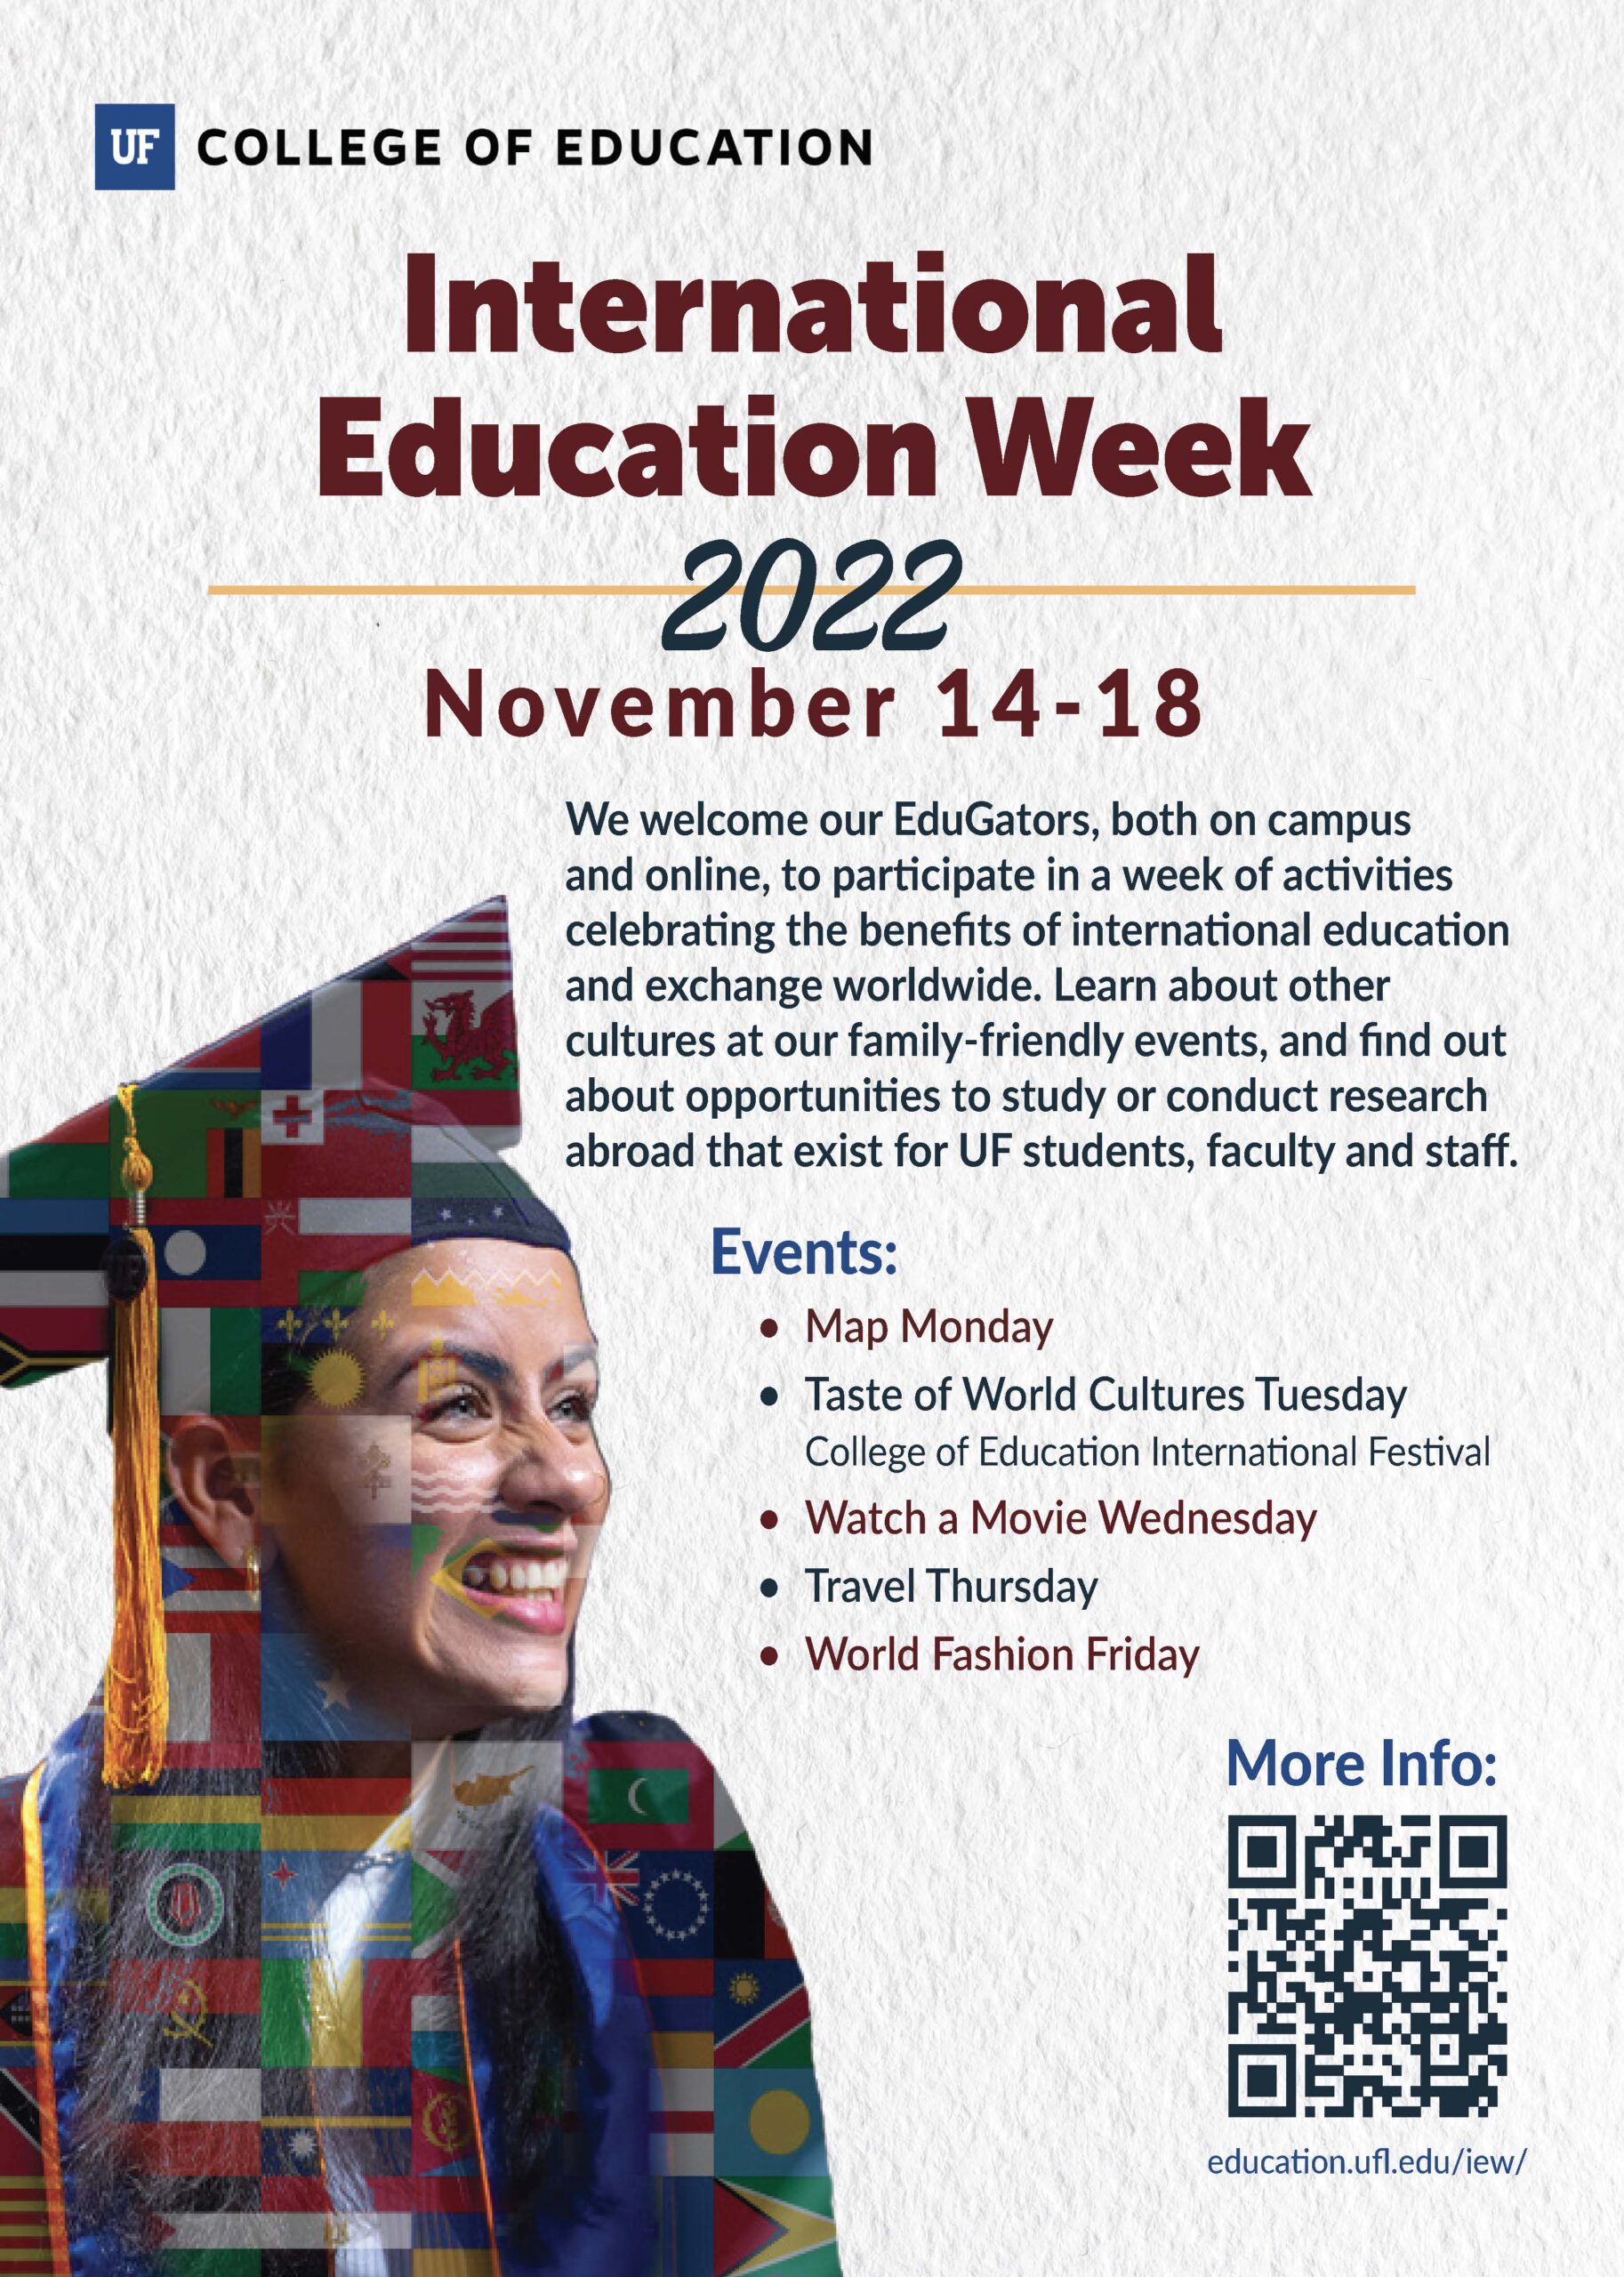 A flyer of Internation Education Week. The flyer has a QR code on the bottom right corner.